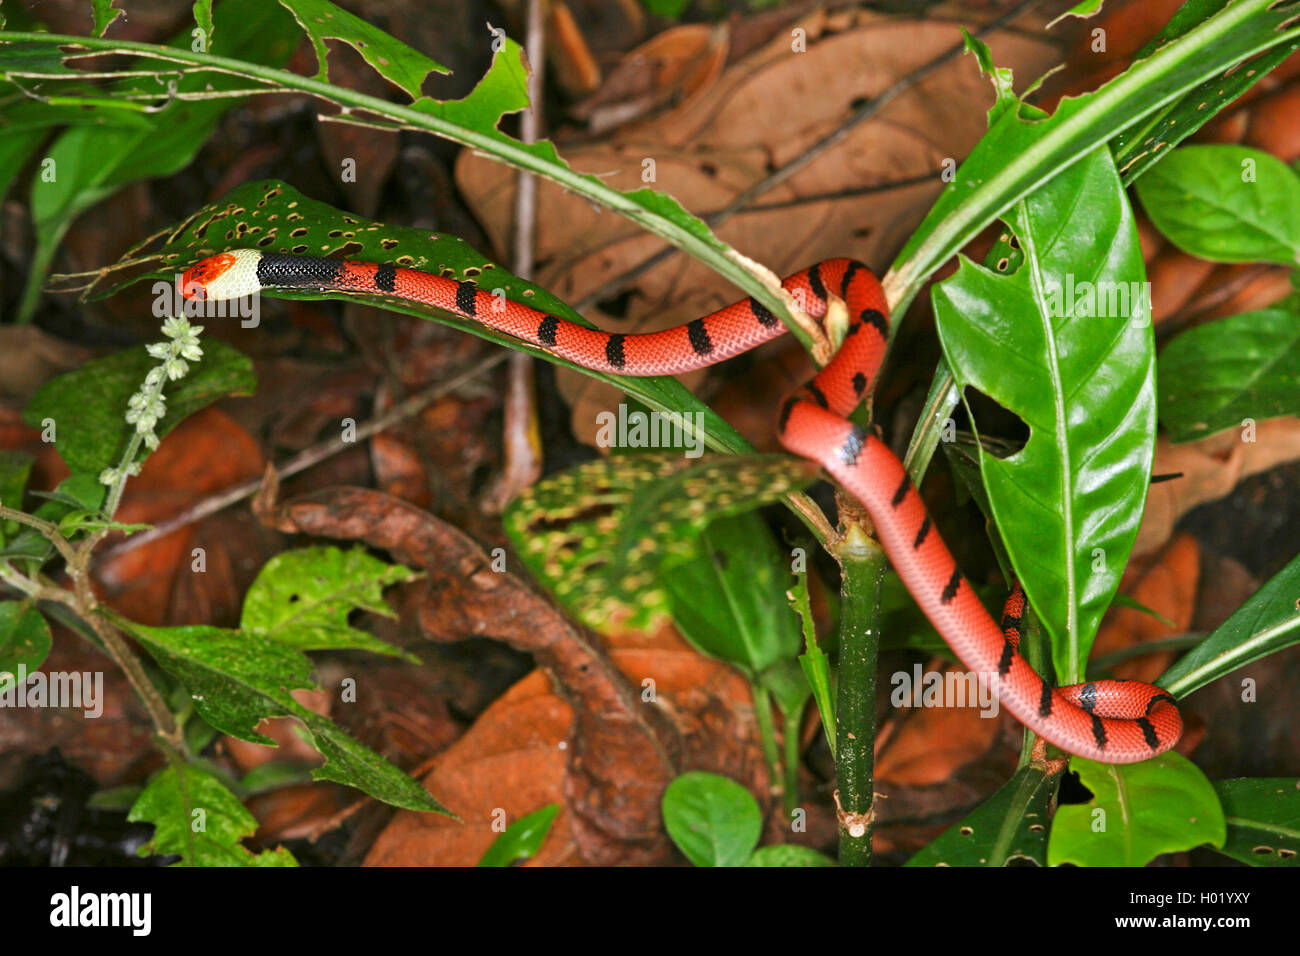 Red-eyed Tree snake (Siphlophis compressus), creeps on a plant, Costa Rica Stock Photo